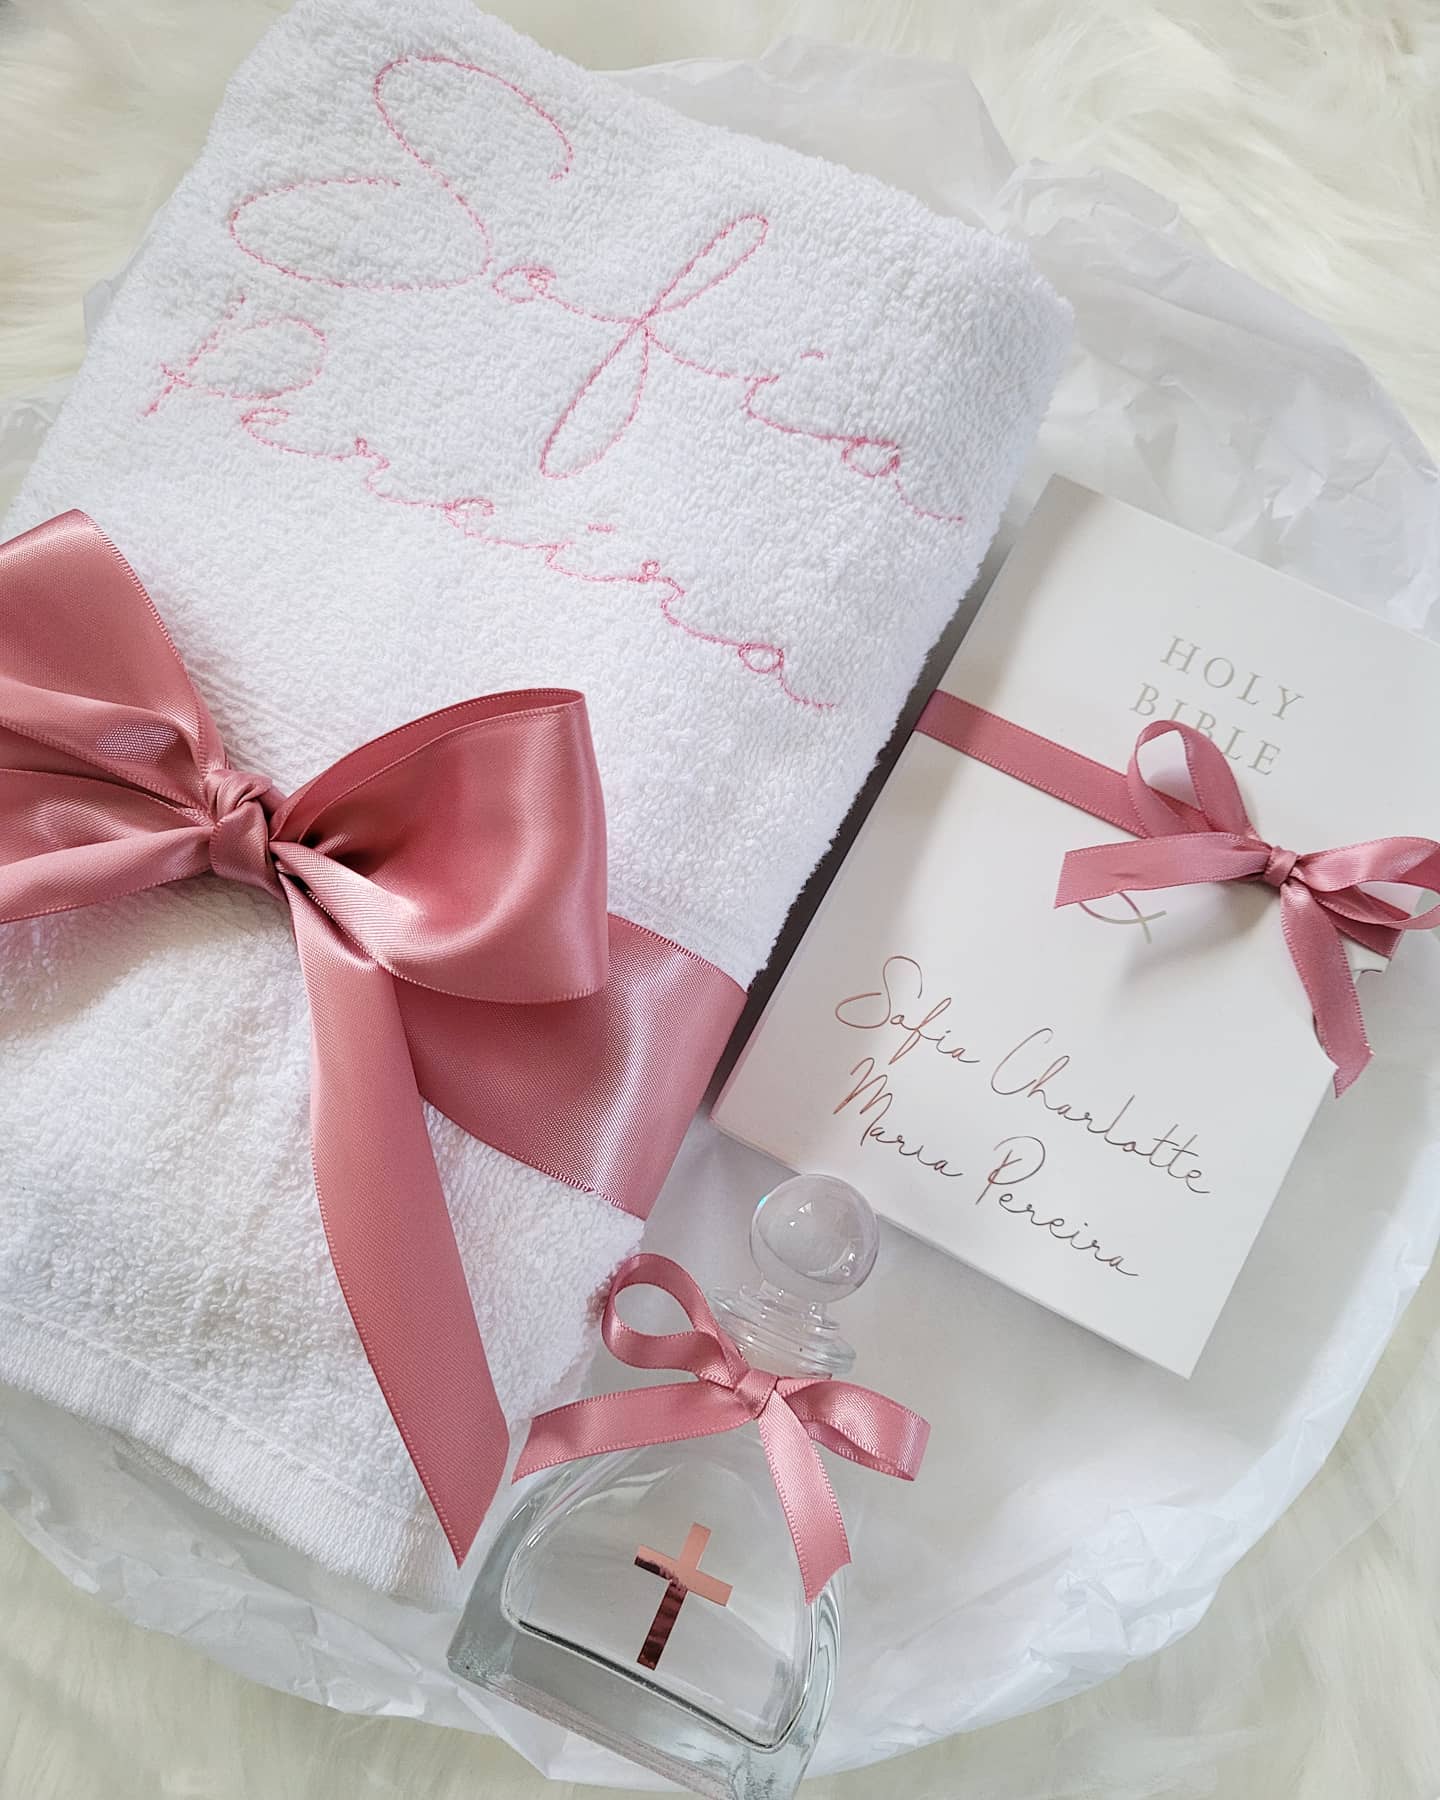 LUXE Round Acrylic Baptism Package